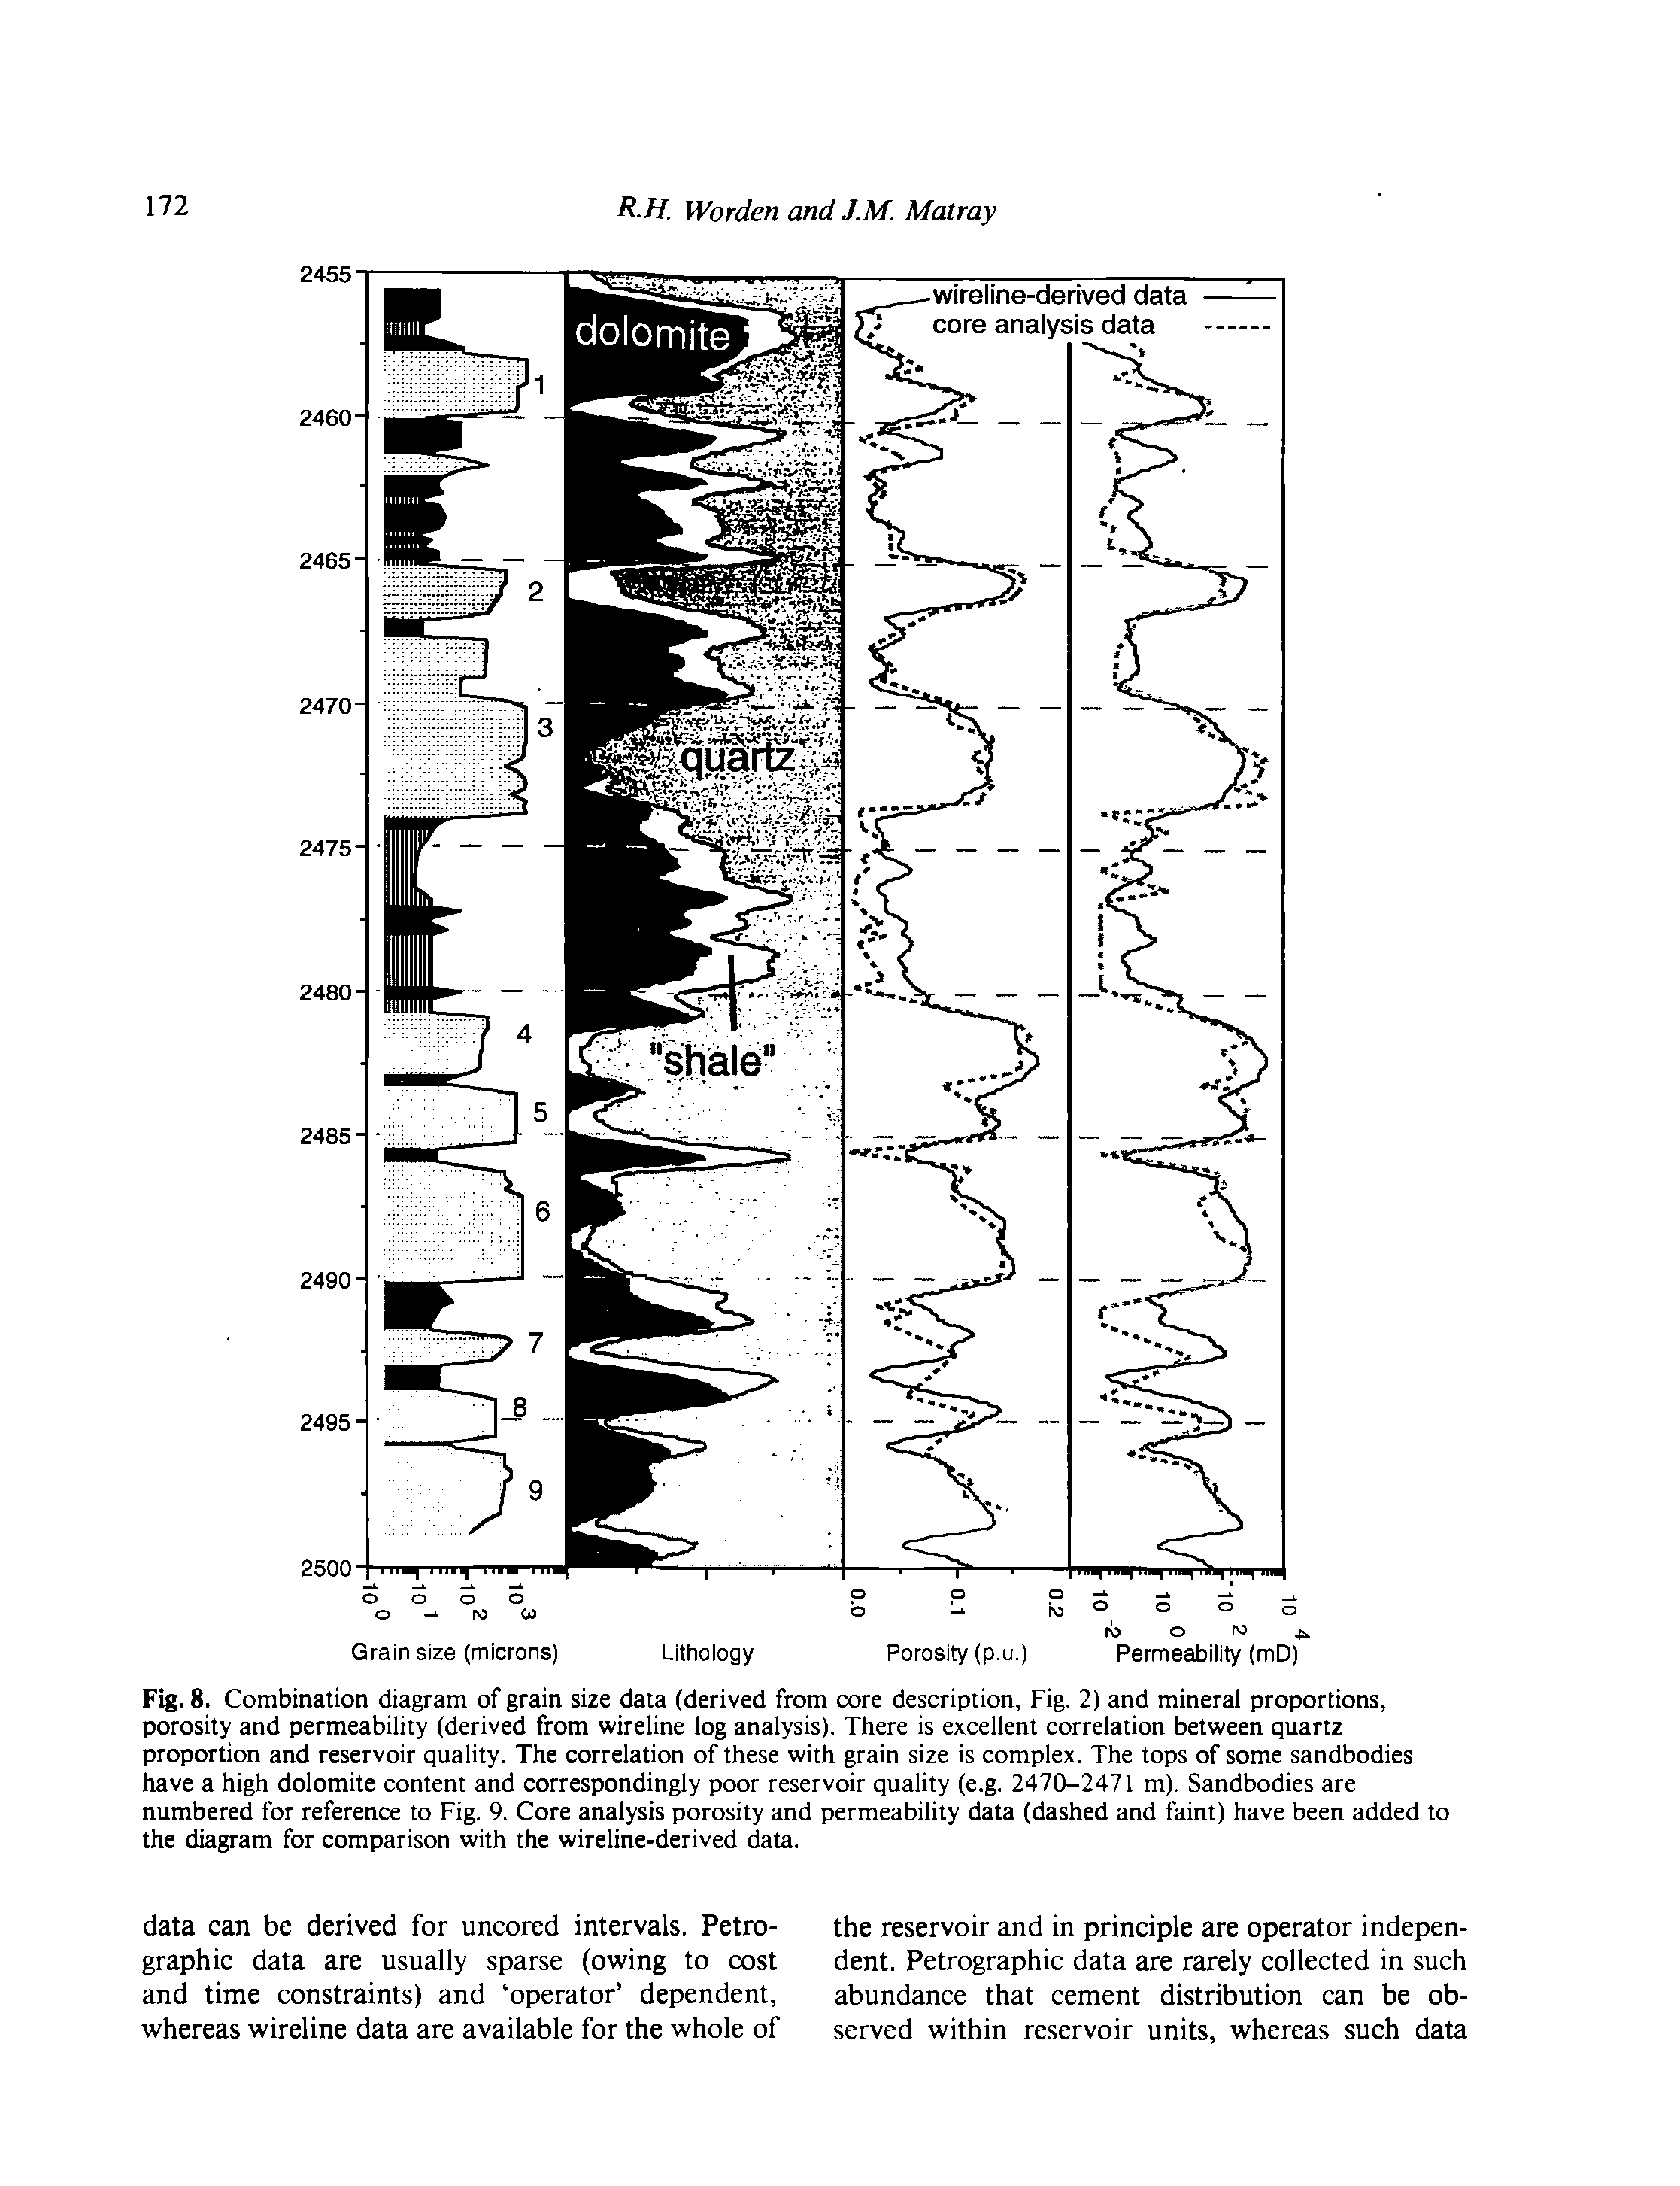 Fig. 8. Combination diagram of grain size data (derived from core description, Fig. 2) and mineral proportions, porosity and permeability (derived from wireline log analysis). There is excellent correlation between quartz proportion and reservoir quality. The correlation of these with grain size is complex. The tops of some sandbodies have a high dolomite content and correspondingly poor reservoir quality (e.g. 2470-2471 m). Sandbodies are numbered for reference to Fig. 9. Core analysis porosity and permeability data (dashed and faint) have been added to the diagram for comparison with the wireline-derived data.